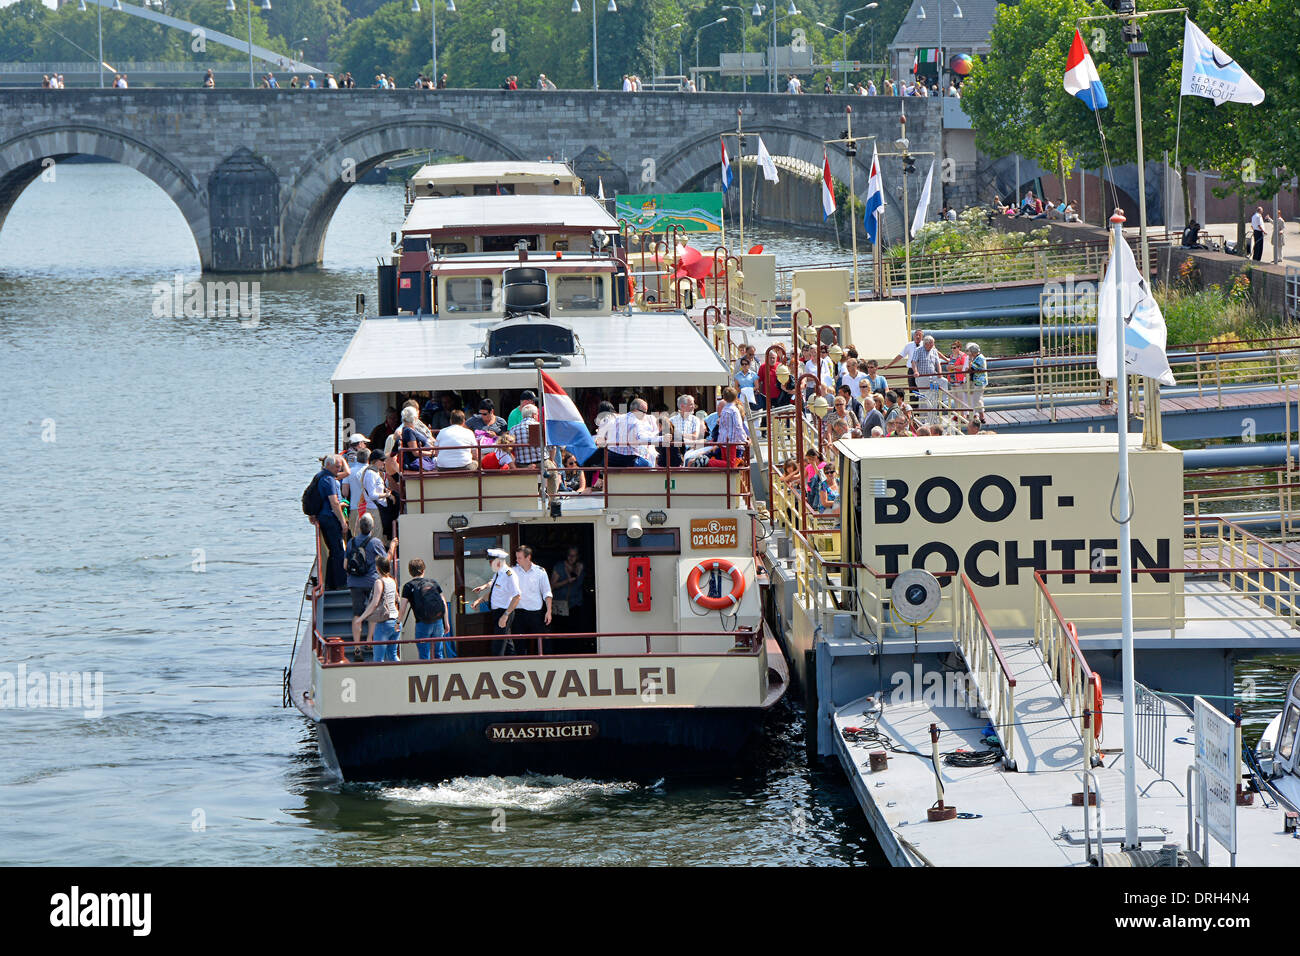 Maastricht River Meuse group of passengers onboard to disembark at Boot Tochten from tour boat with next group waiting on jetty to board Limburg EU Stock Photo